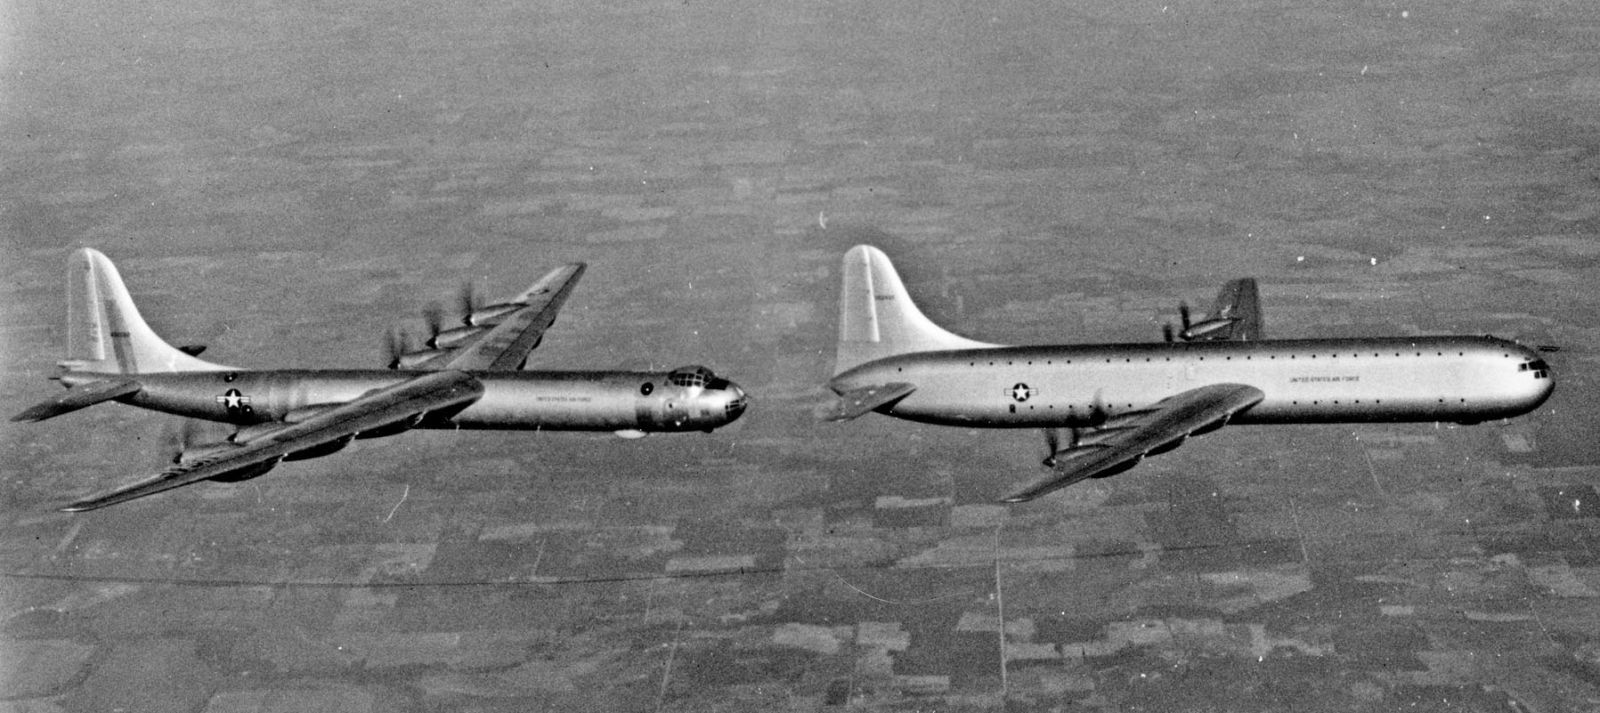 A B-36 and the cargo carrying variant XC-99 in flight. Only a single XC-99 was built